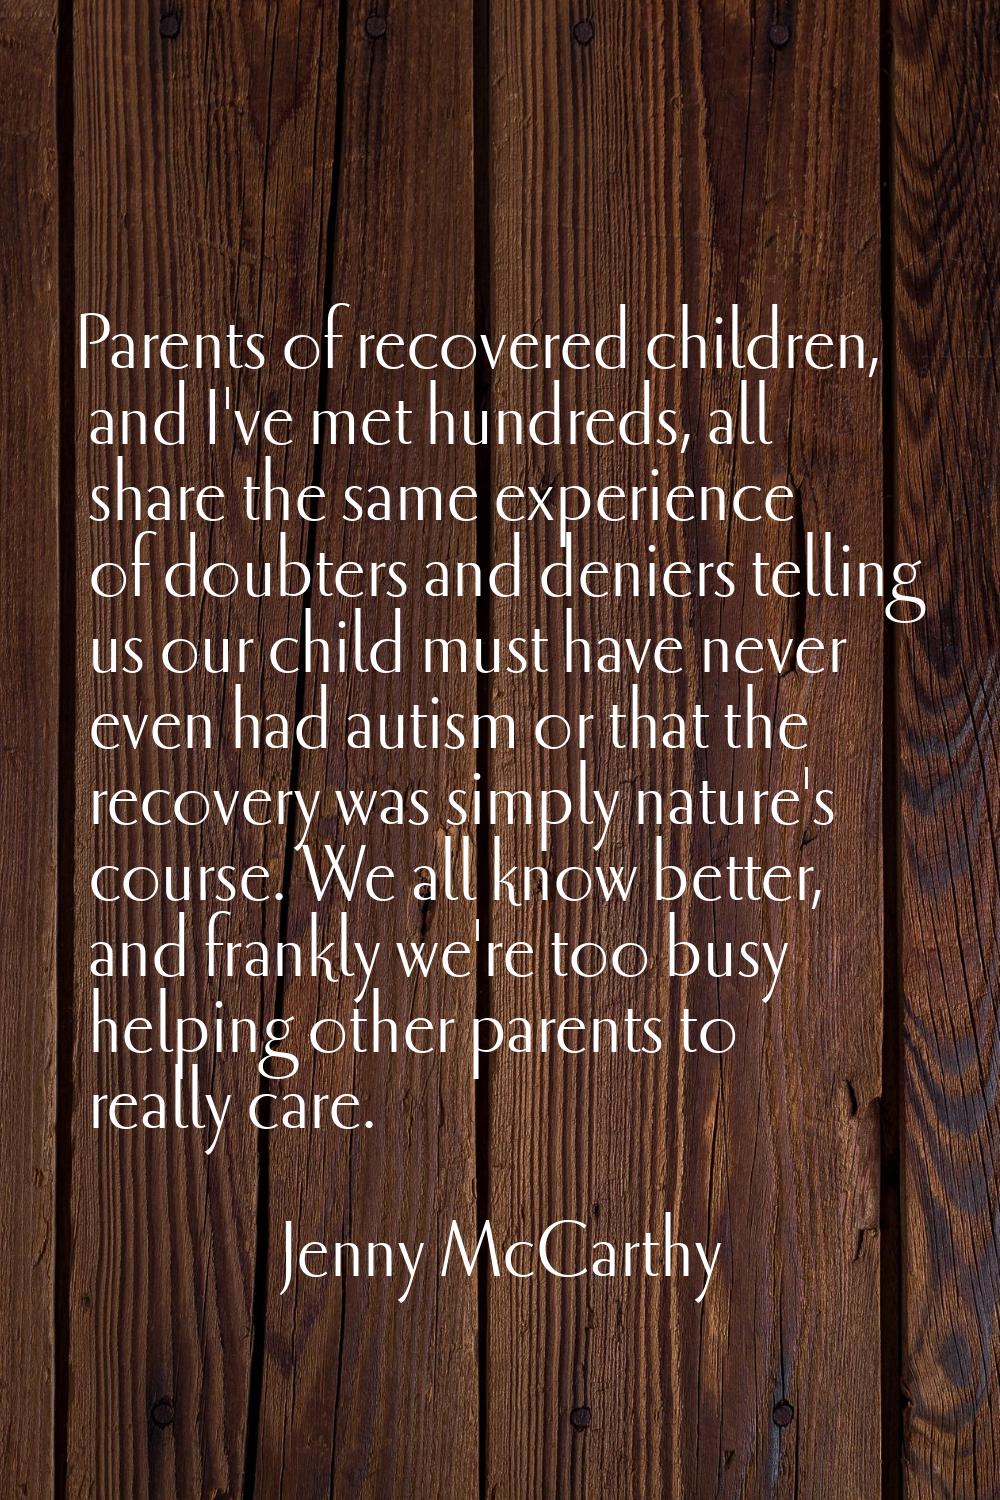 Parents of recovered children, and I've met hundreds, all share the same experience of doubters and